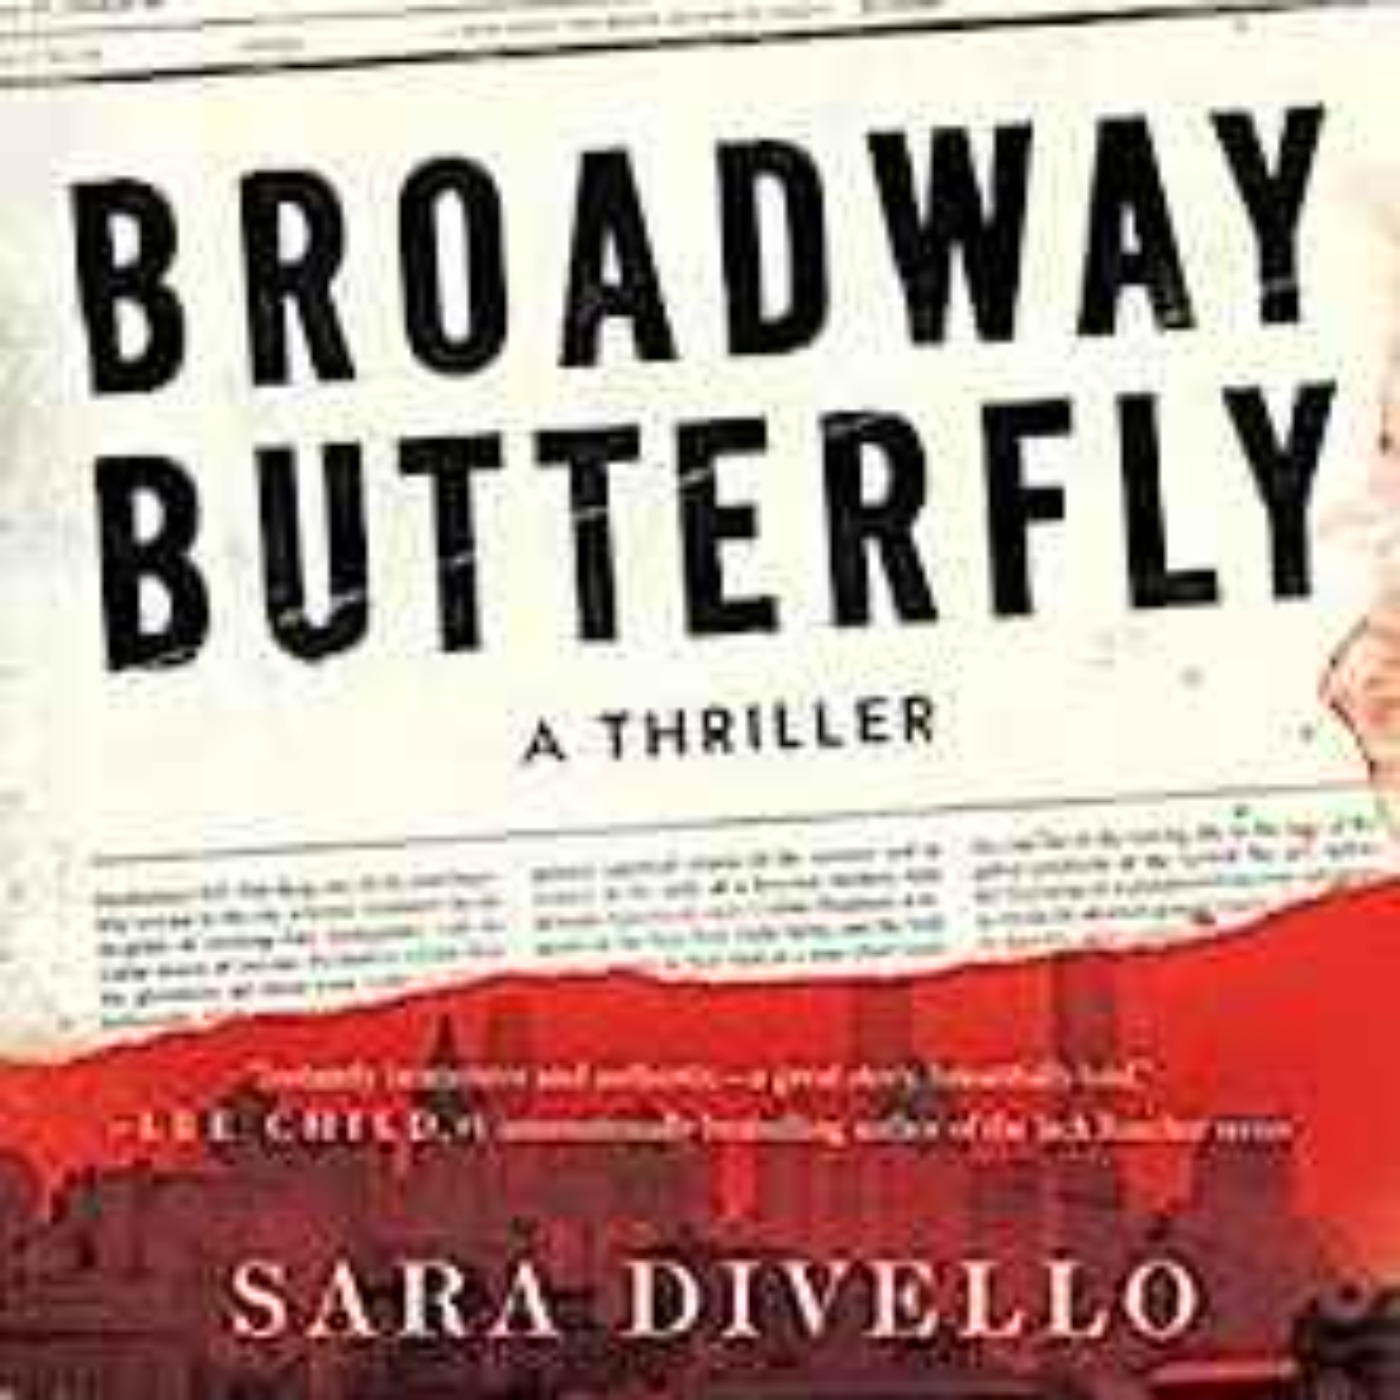 Sara DiVello - Broadway Butterfly